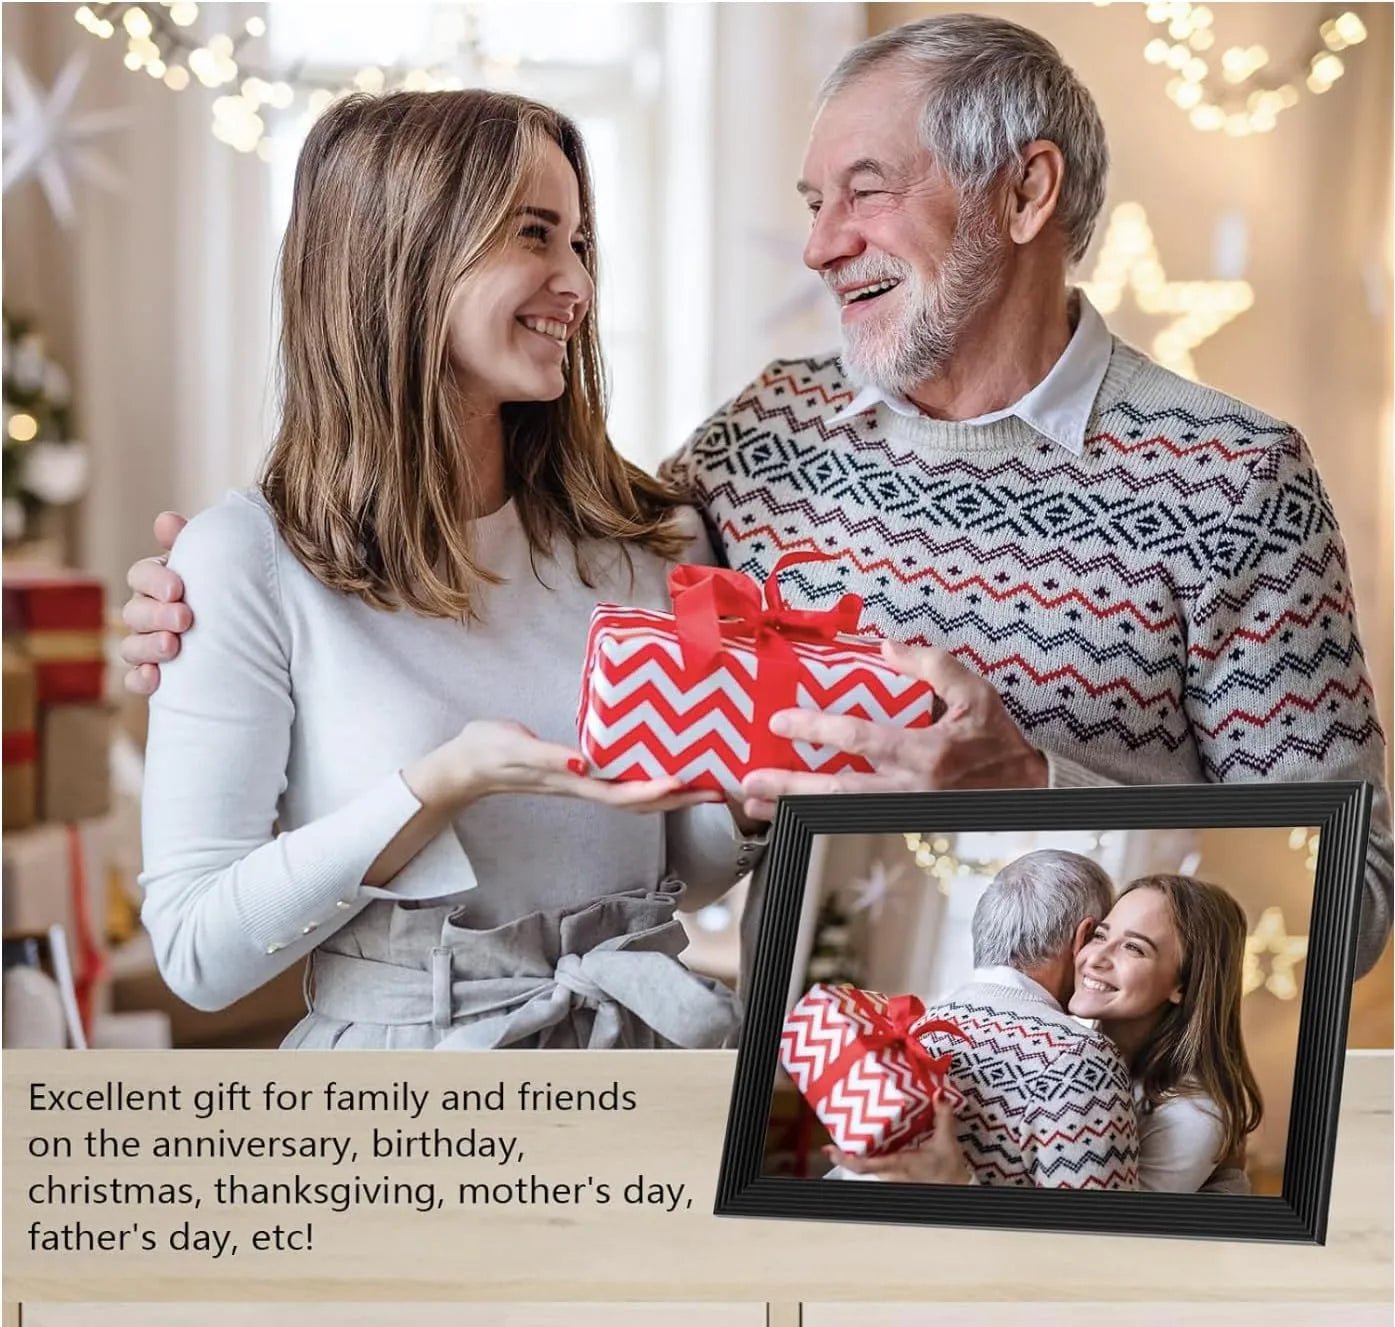 A young woman giving an older man a present with a Digital Photo Frame in landscape mode in the corner